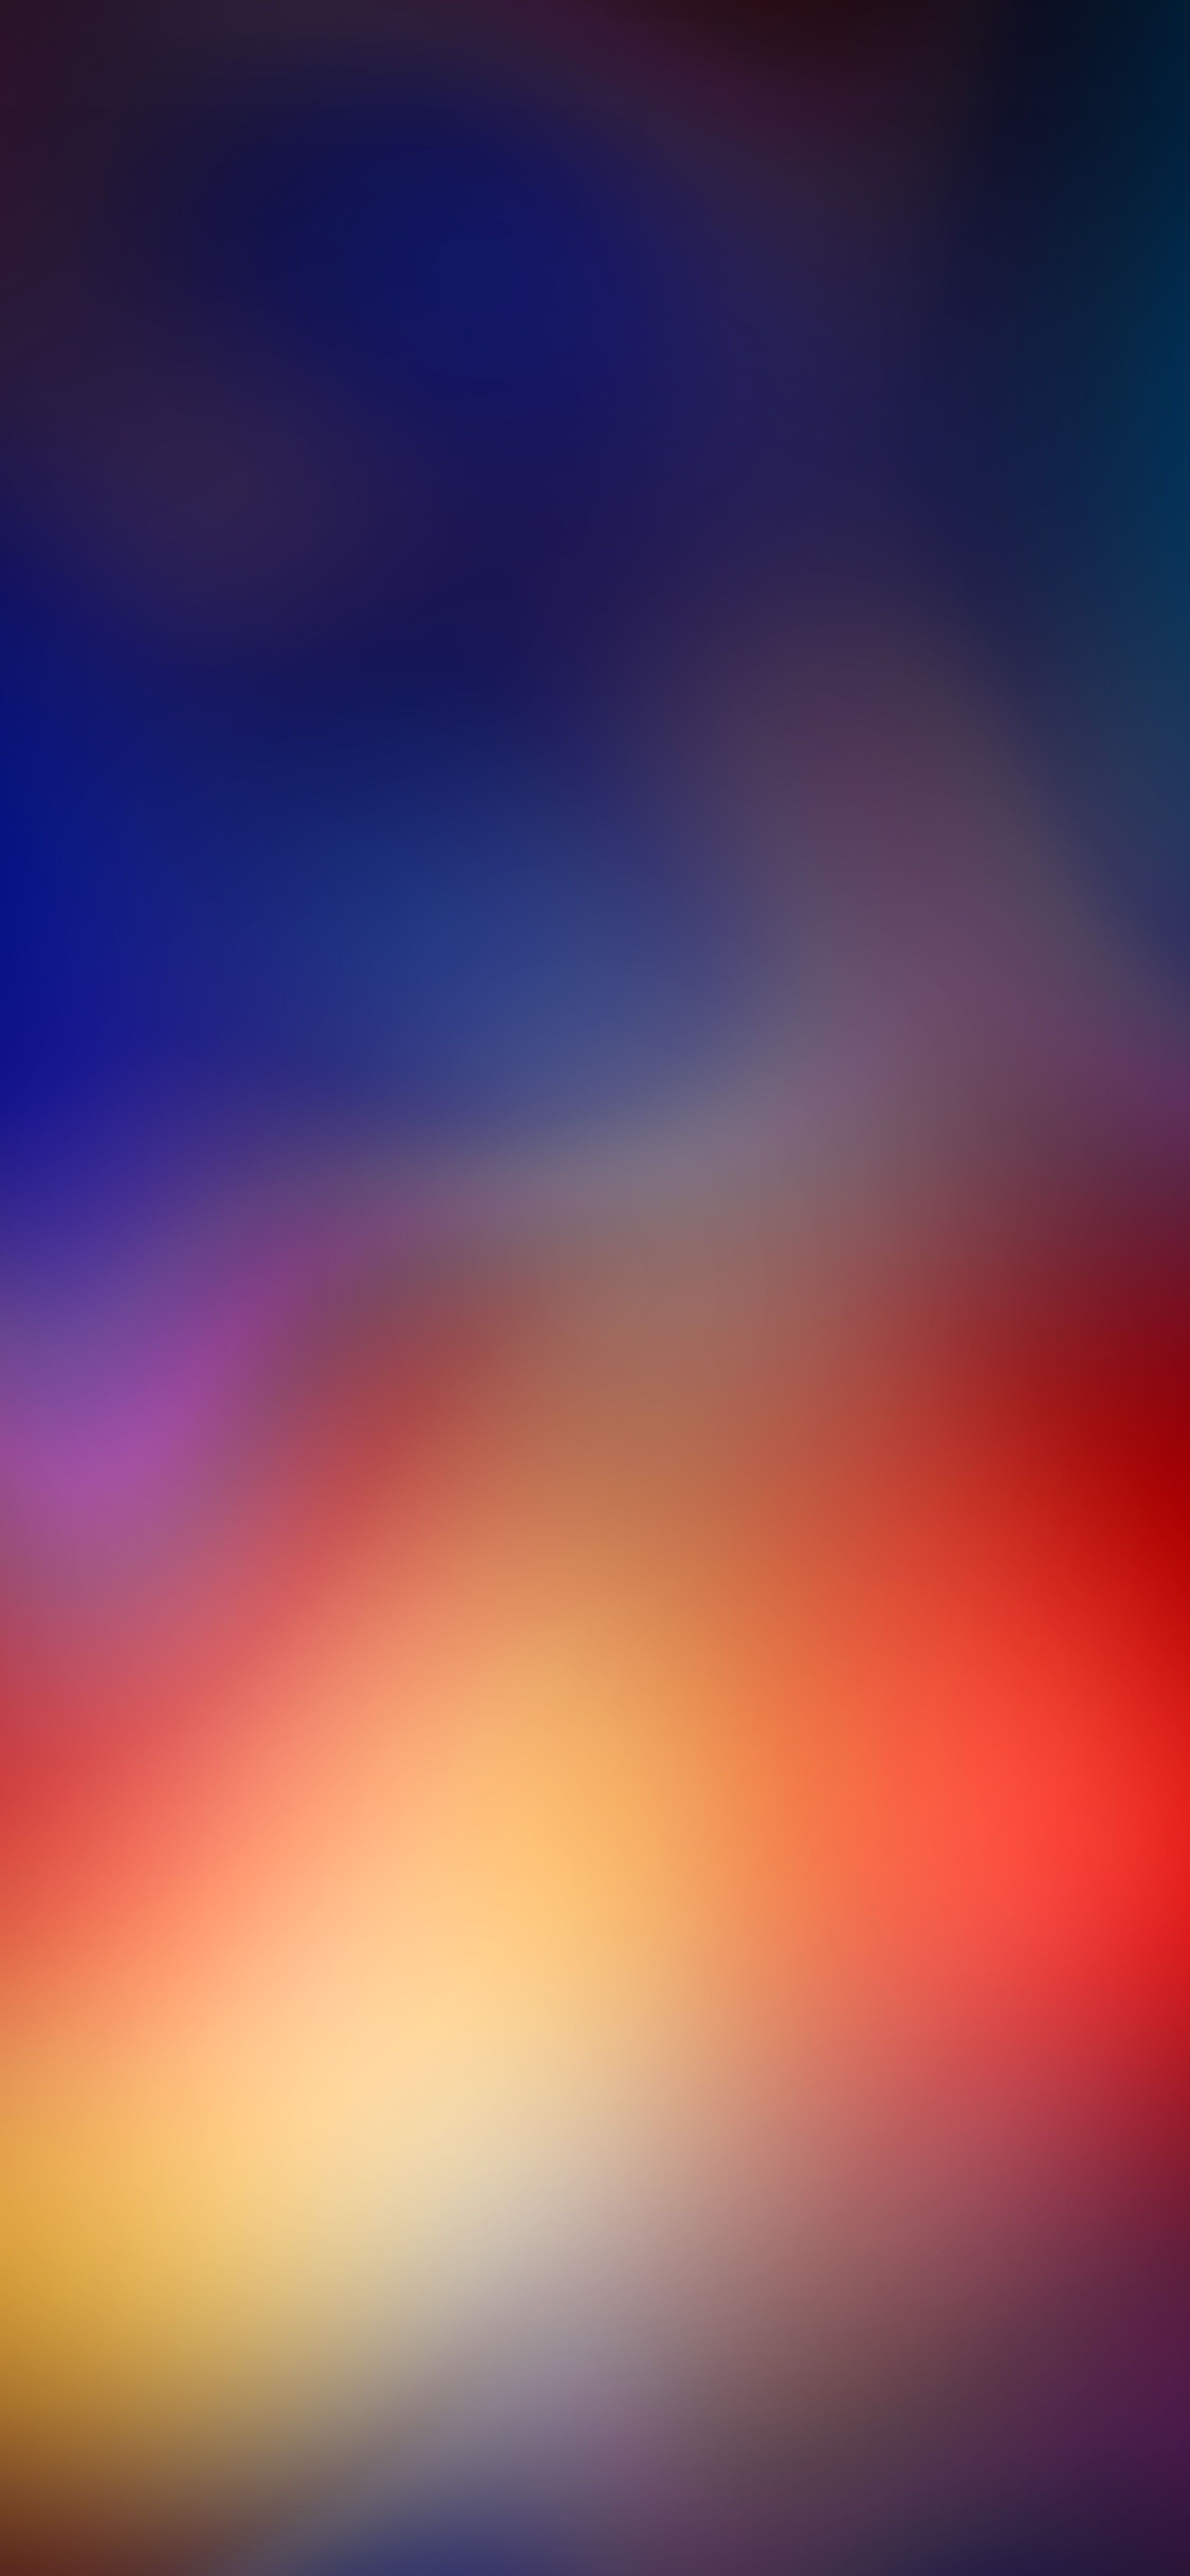 Apple Stock Wallpaper And Image